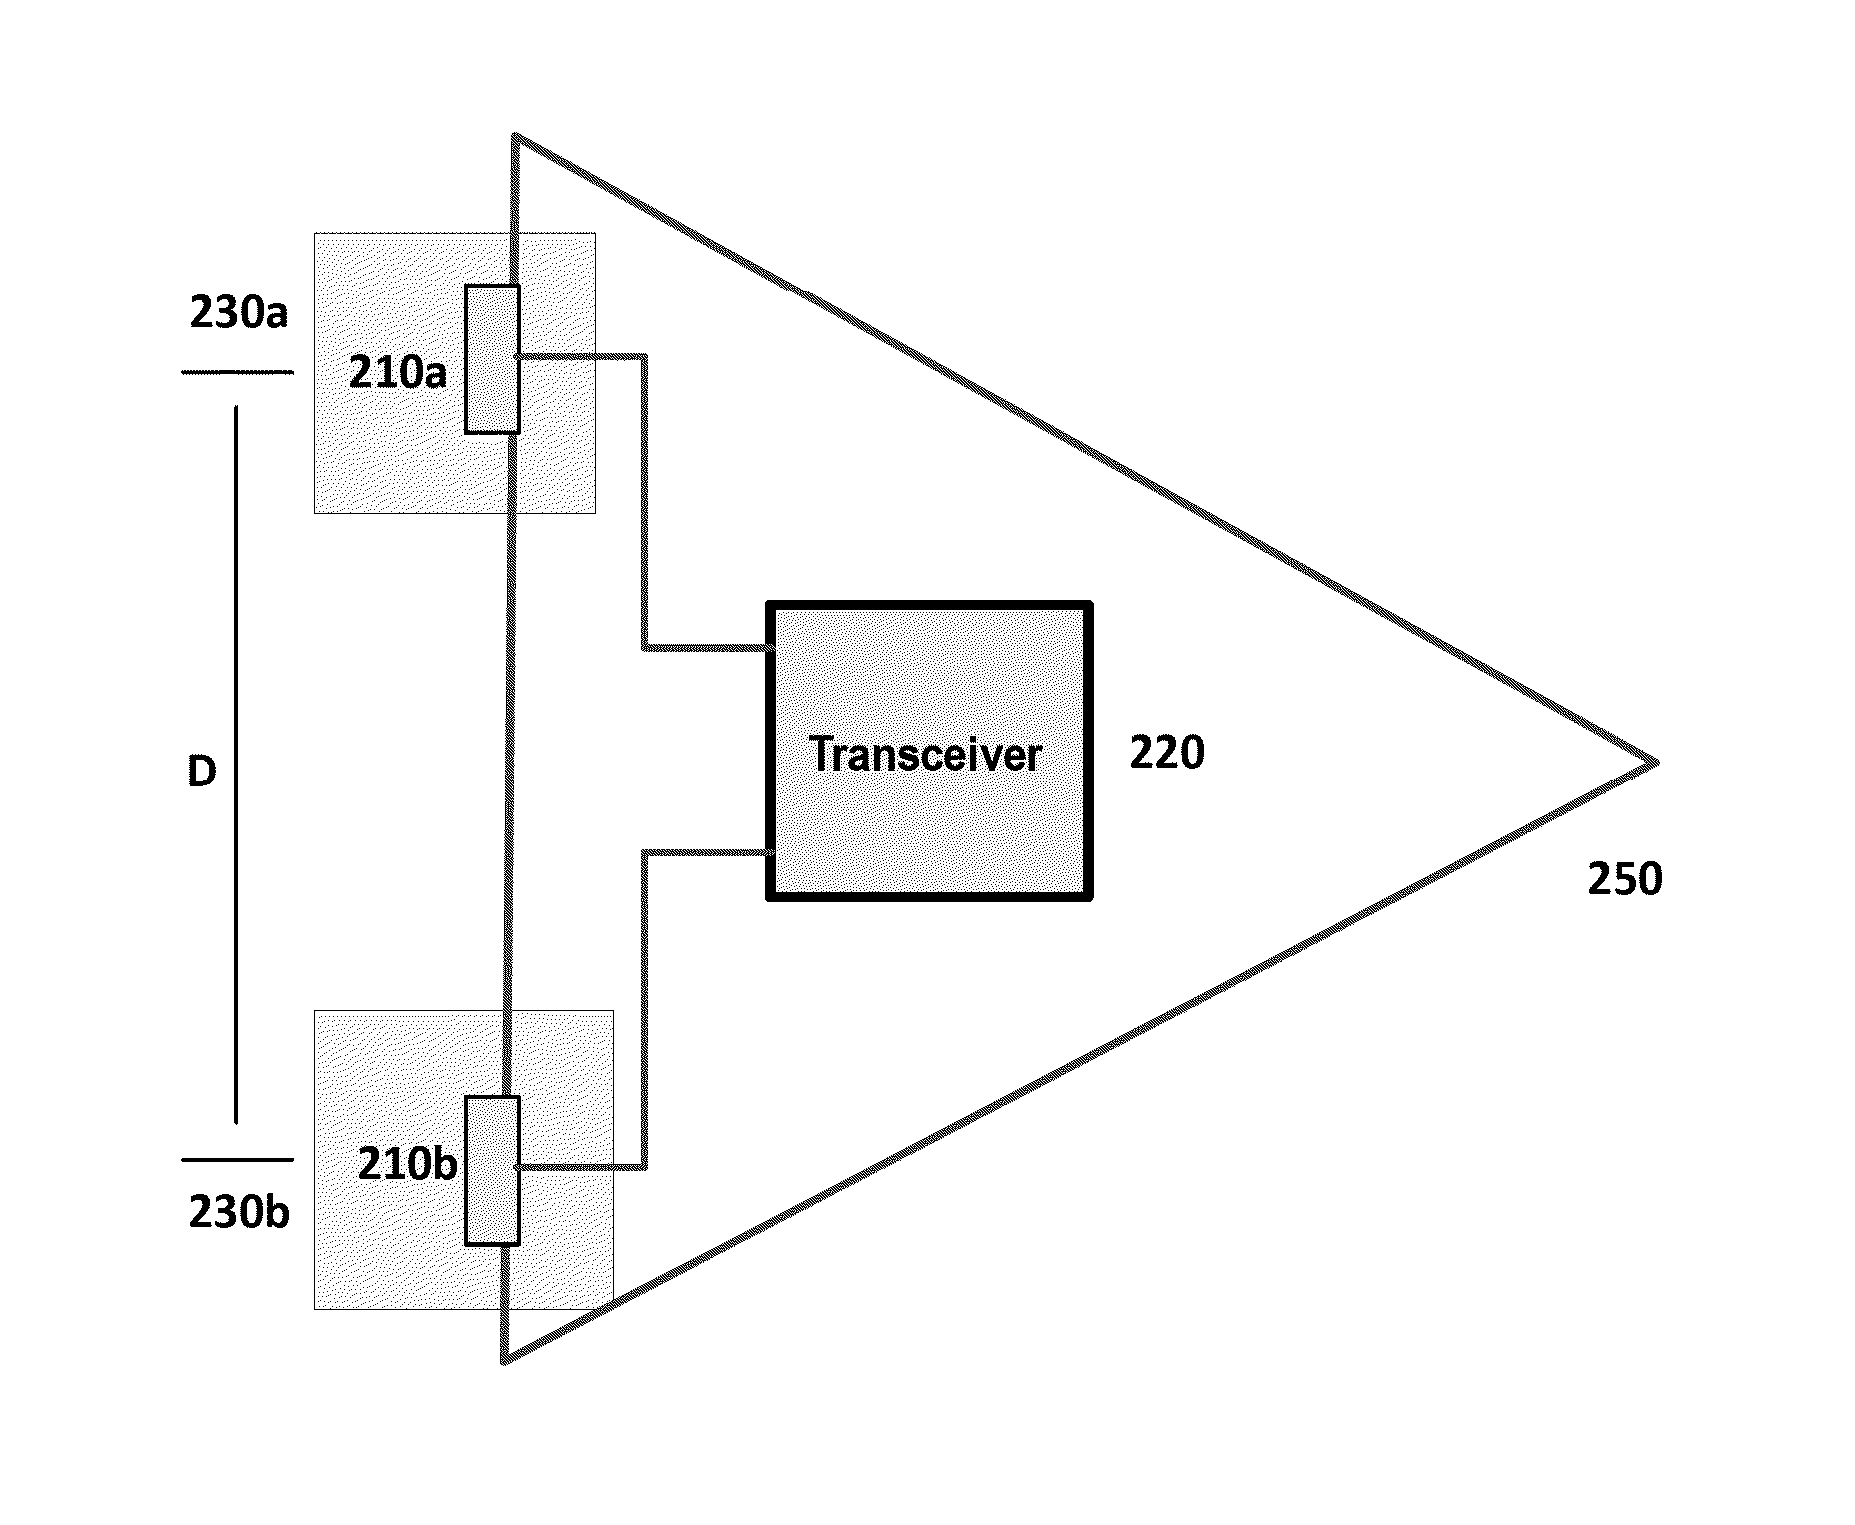 Multi-sector antenna structure